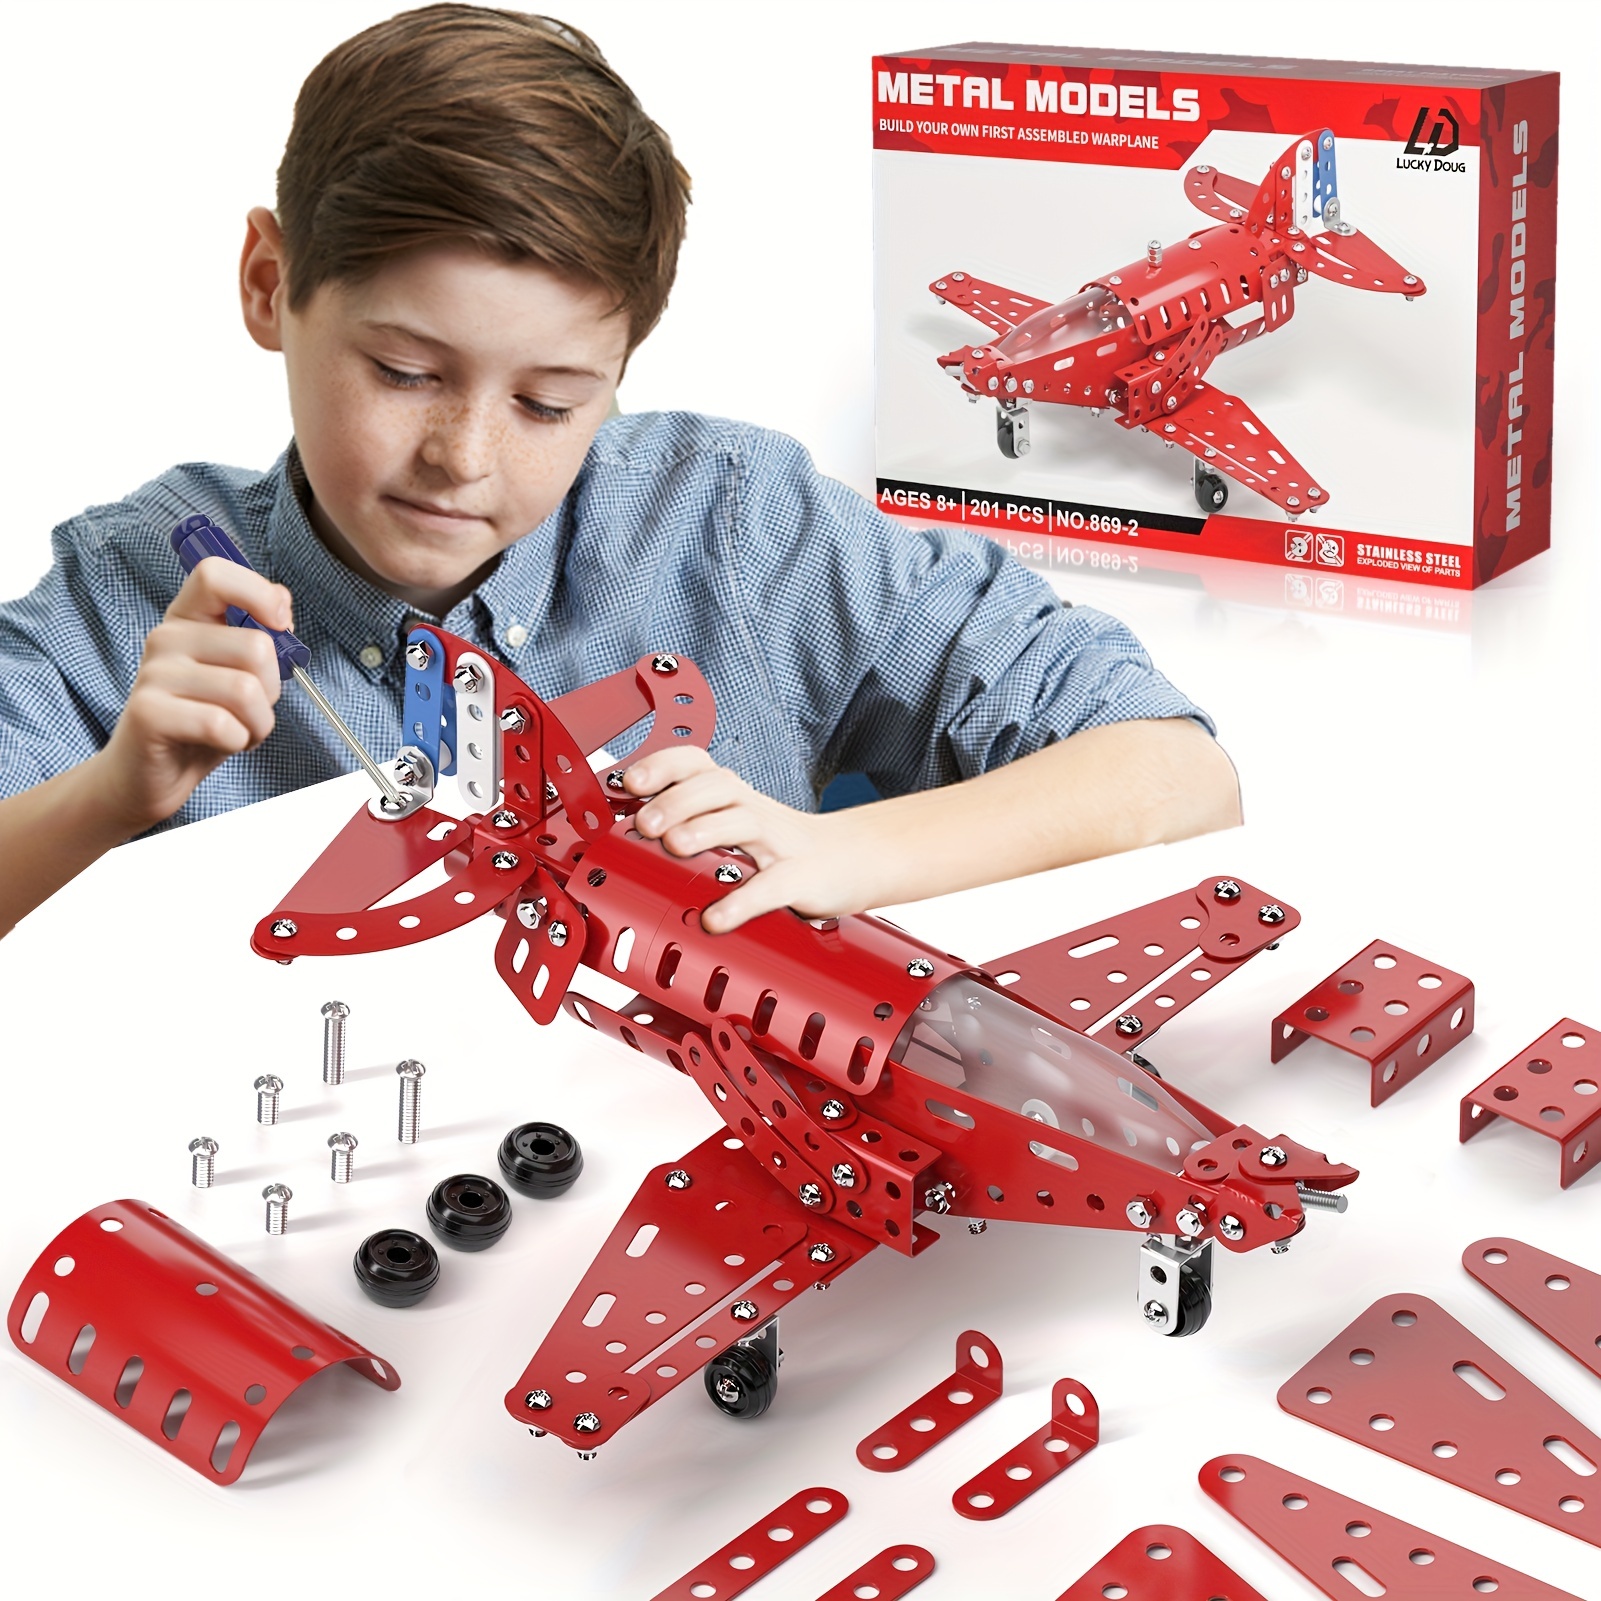  Garbo Star Model Airplane Building Kit - 285 Pieces STEM Toy  for Kids Ages 8-12, Educational Science Project Gift for Boys and Girls :  Toys & Games